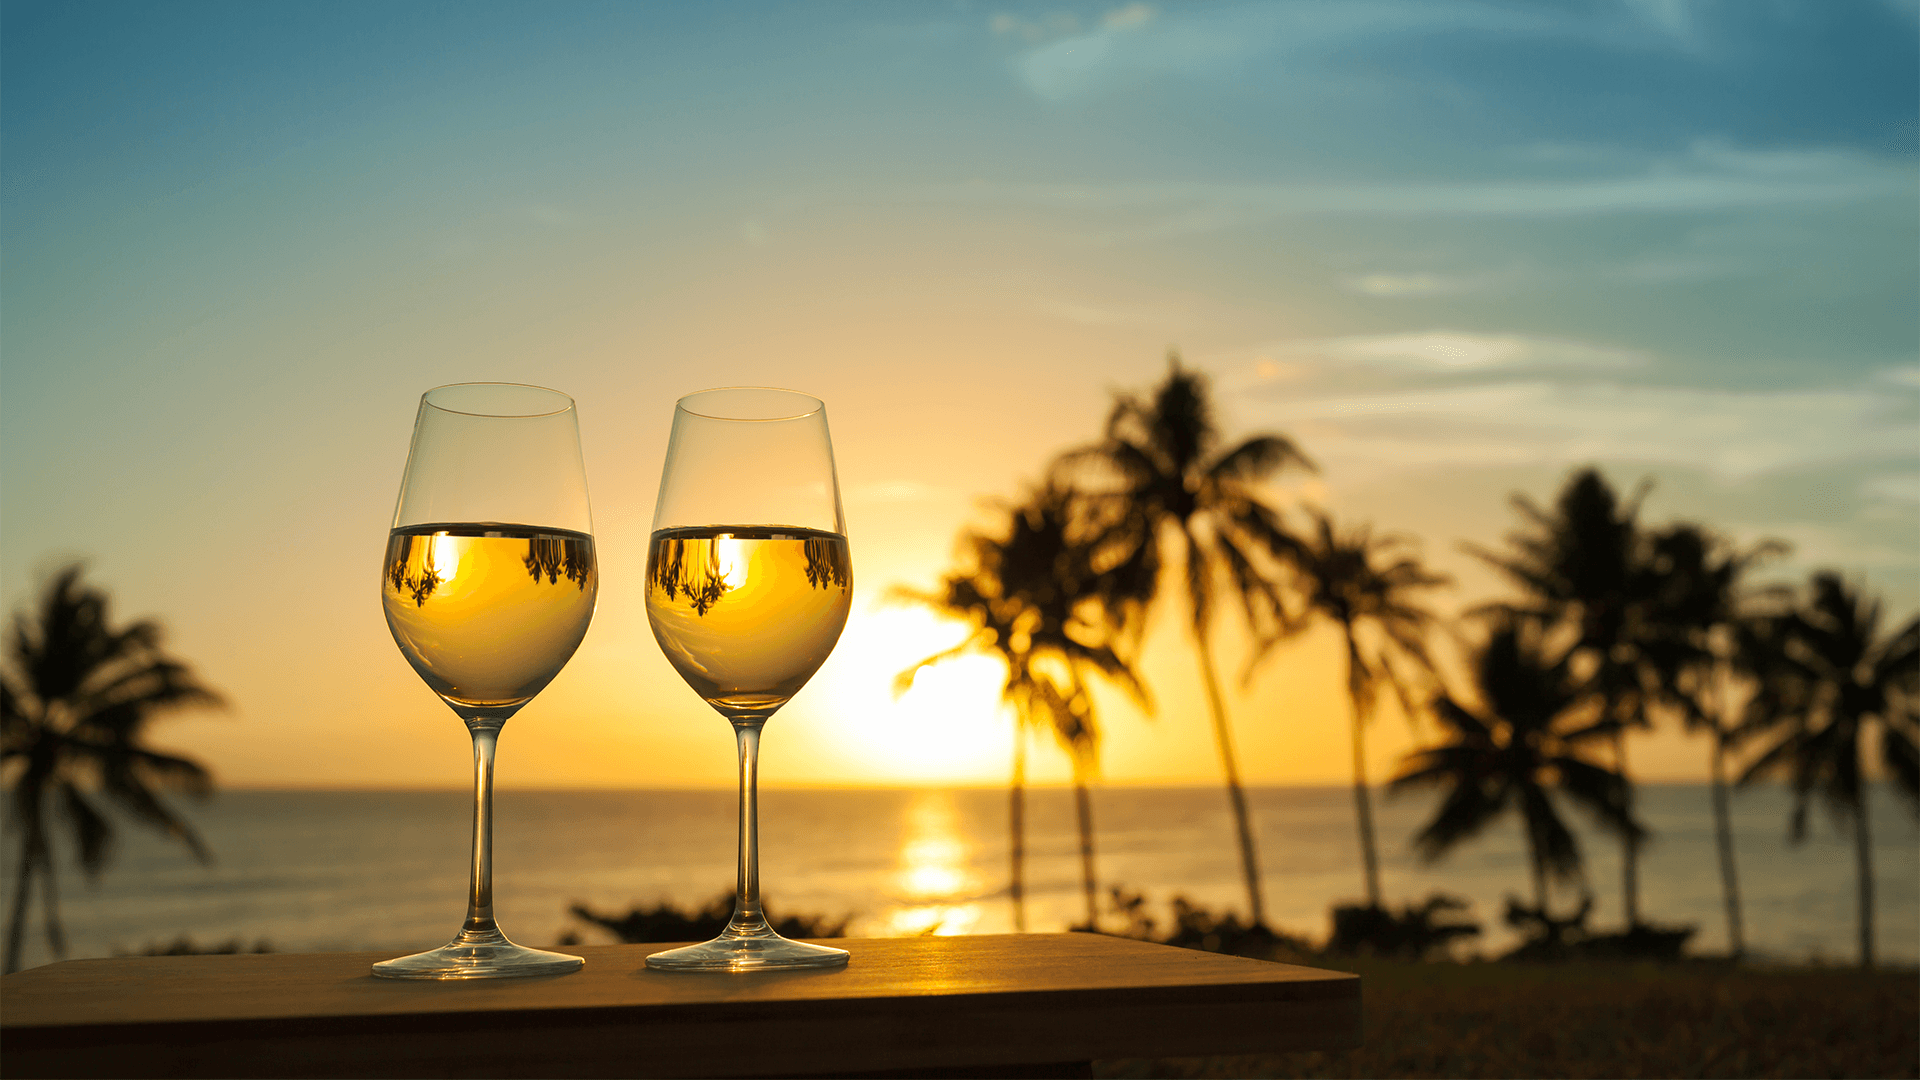 Wine glasses on a table with palm trees in the background